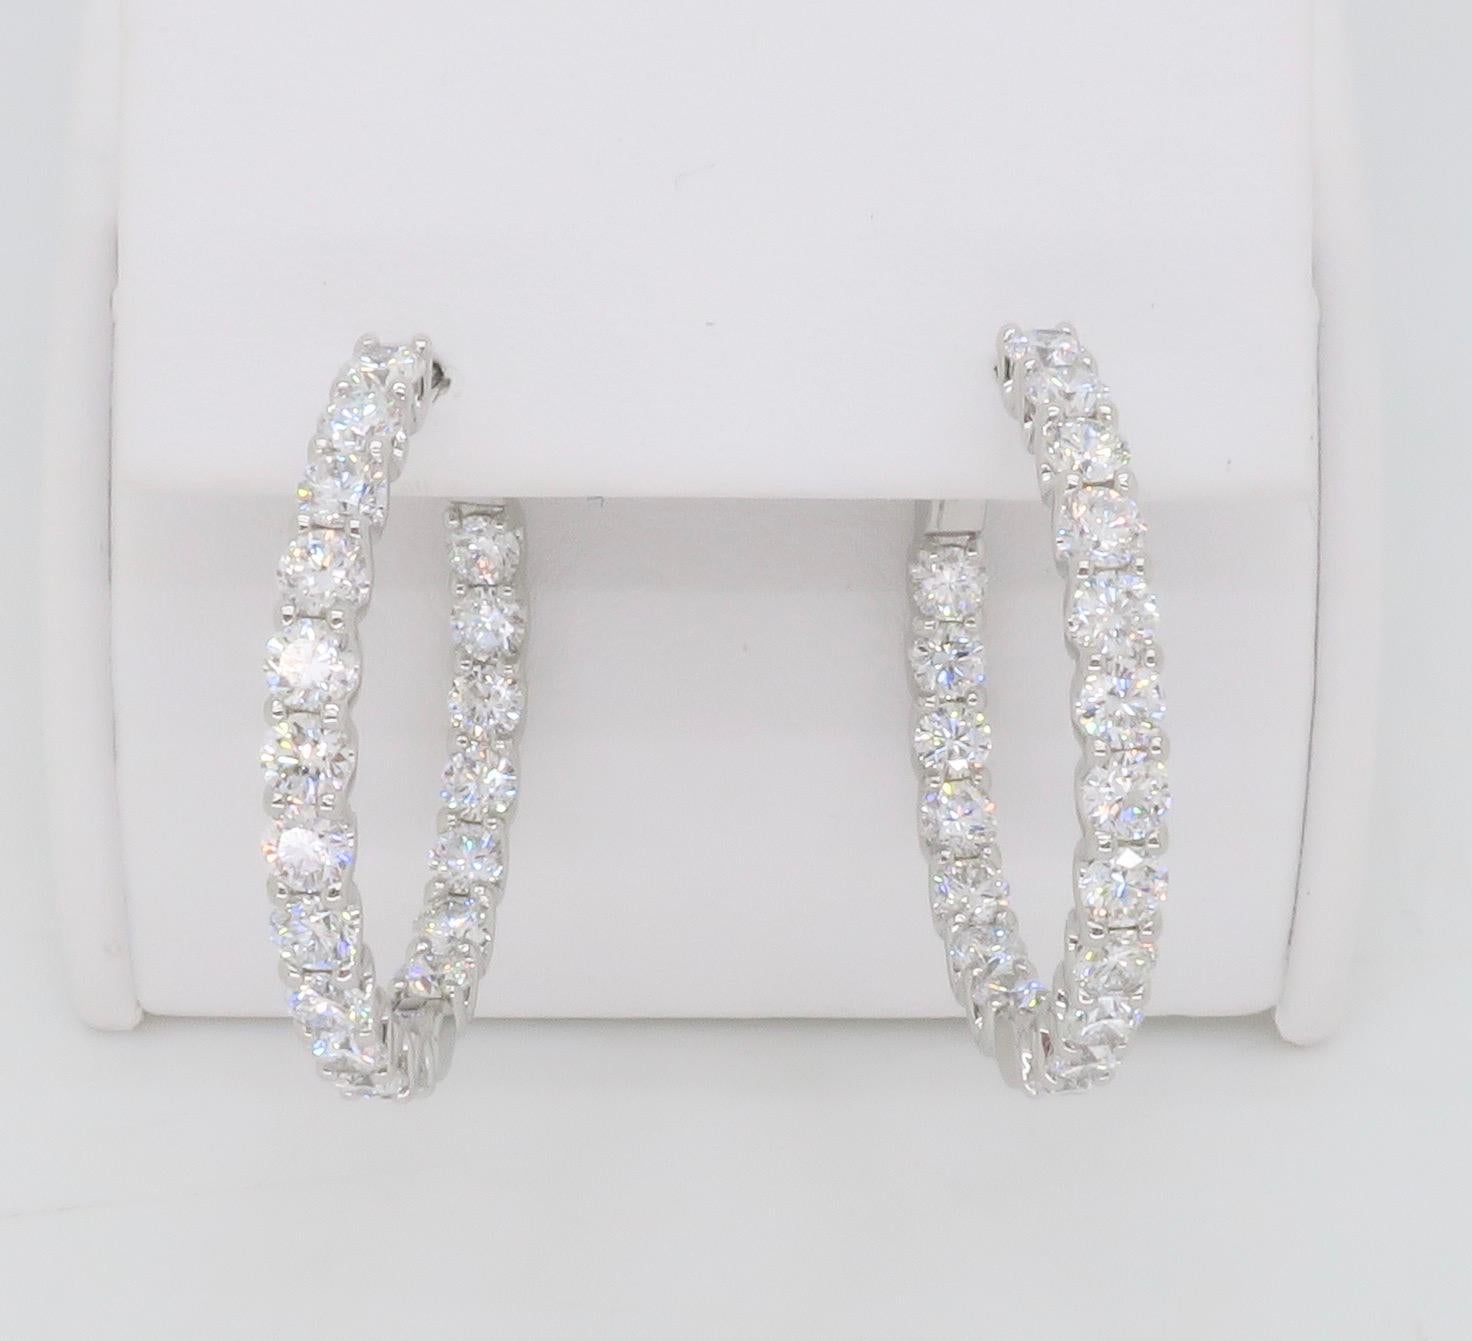 Stunning 4.18ctw Diamond inside out hoop earrings made in 14k white gold, featuring a lock style closure for extra security. 

Diamond Carat Weight: 4.18 CTW 
Diamond Cut: Round Brilliant 
Color: Average F-G
Clarity: Average VS
Metal: 14K White